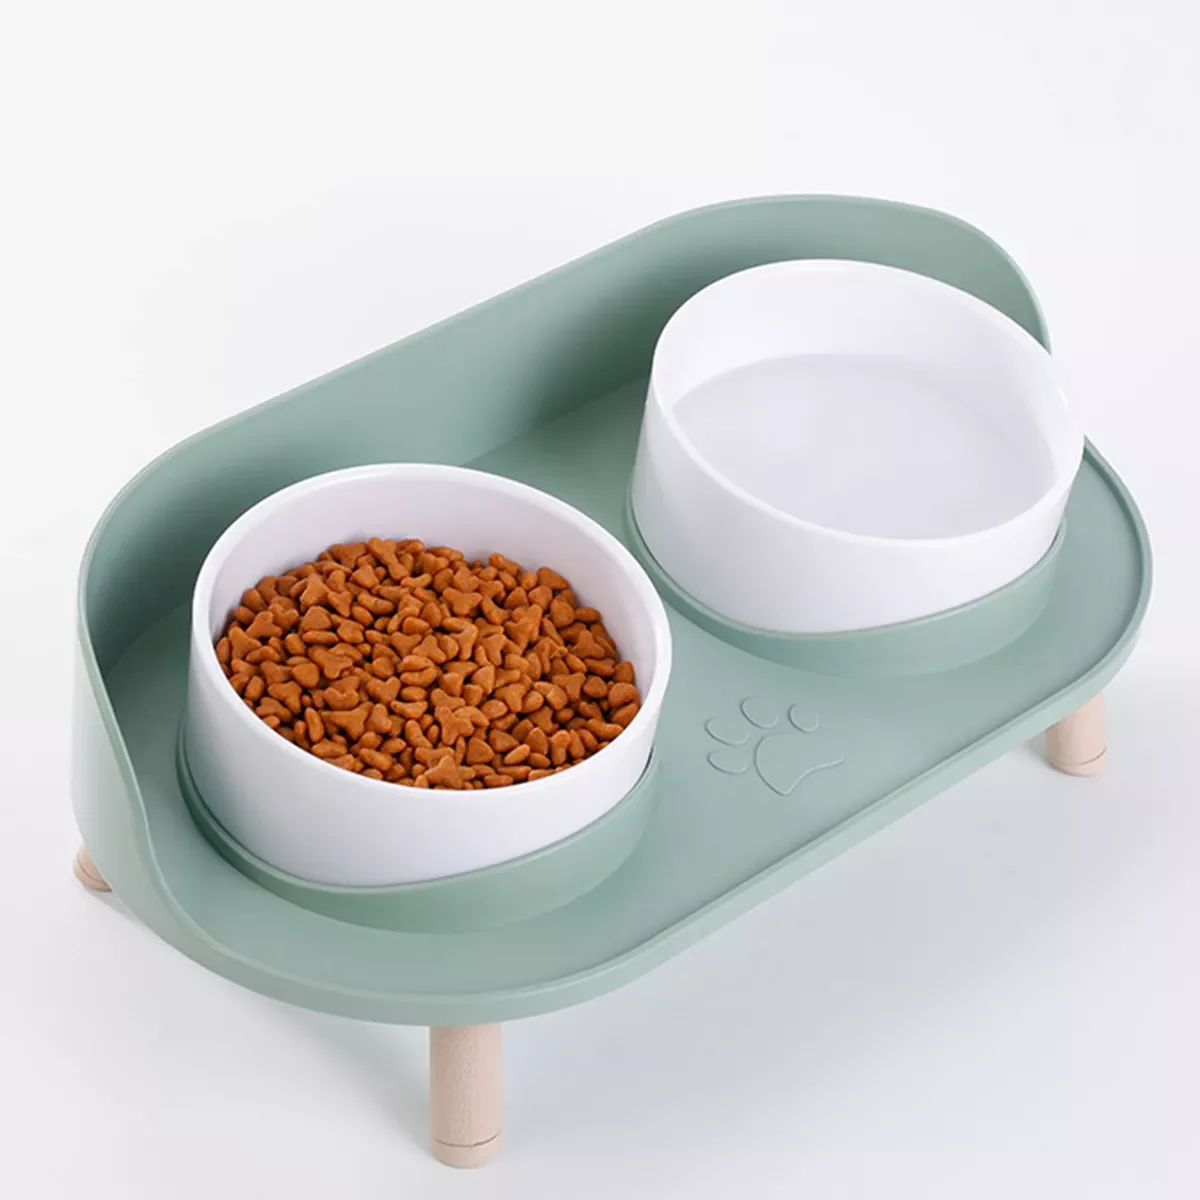 

Cat Double Bowl ABS Round Pets Feeding Water Bowls Cat Puppy Feeder Product Supplies Dog Food Water Bowl Color Random